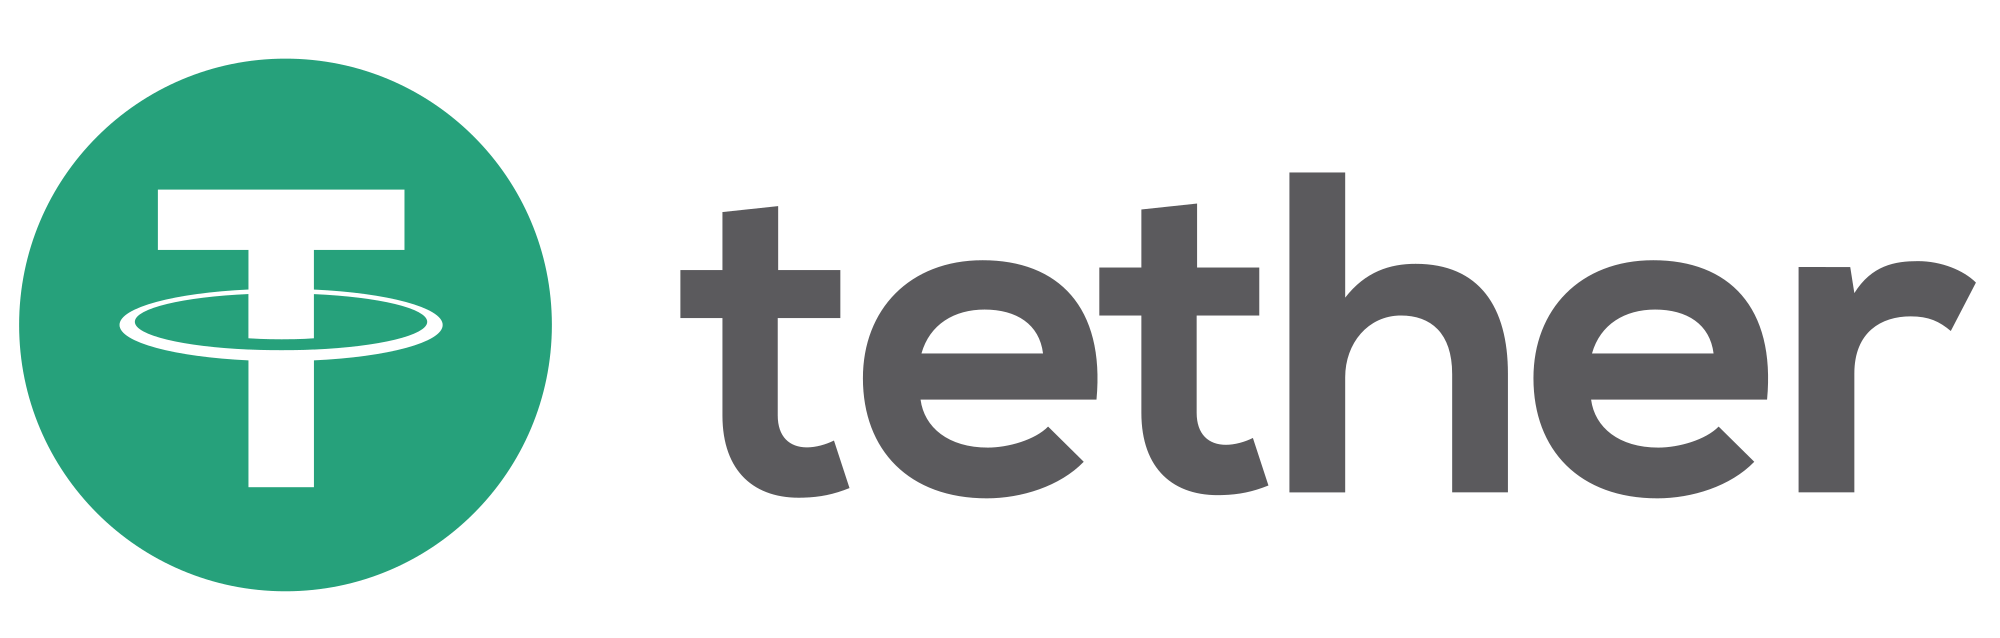 Tether Logo - File:Tether Logo.svg - Wikimedia Commons